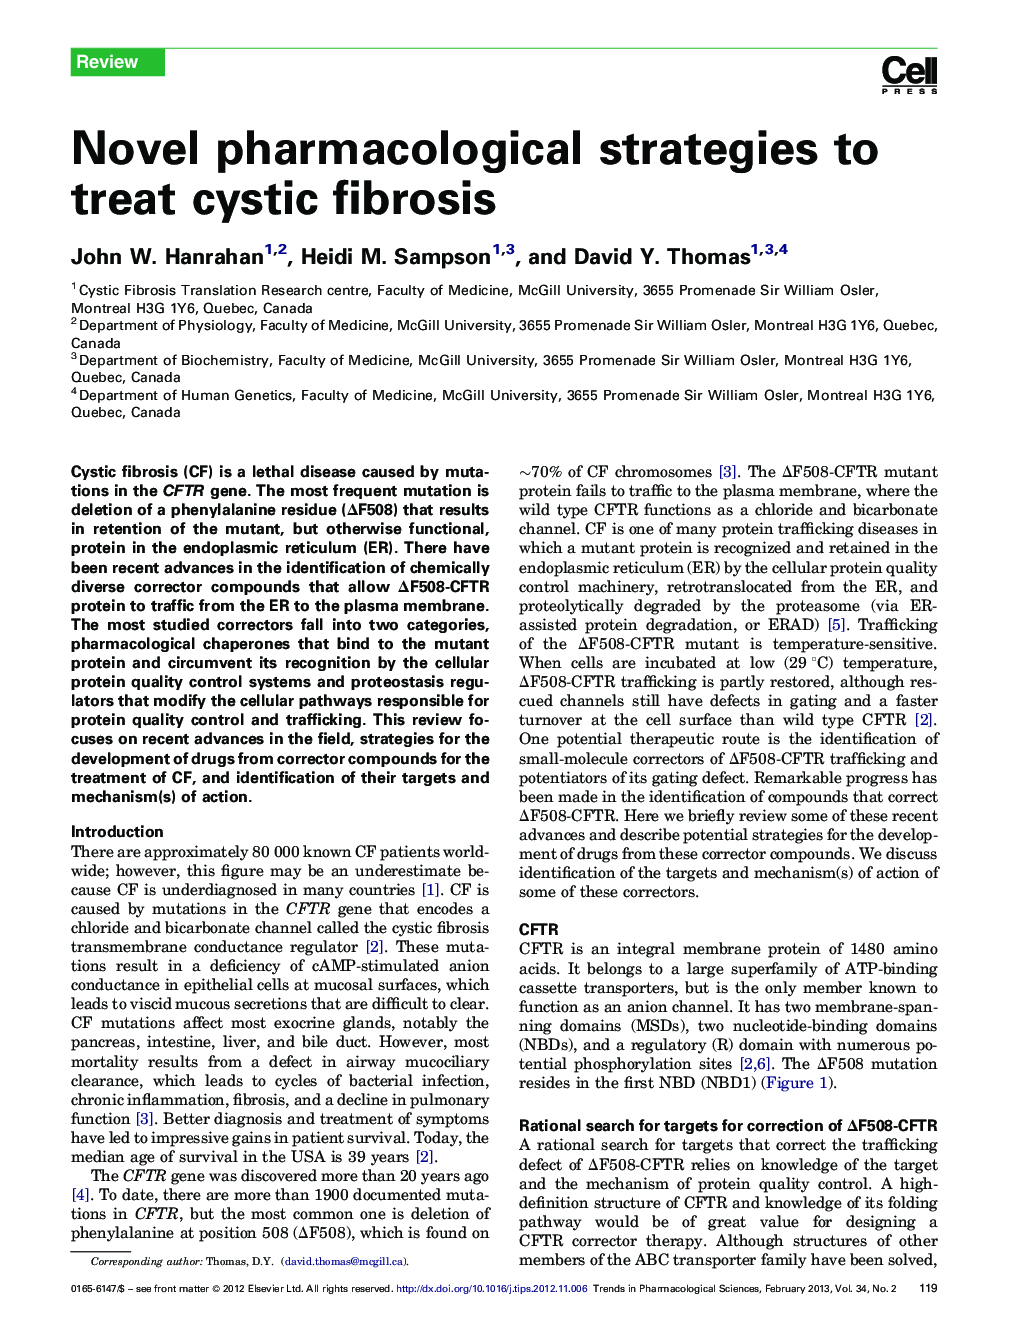 Novel pharmacological strategies to treat cystic fibrosis